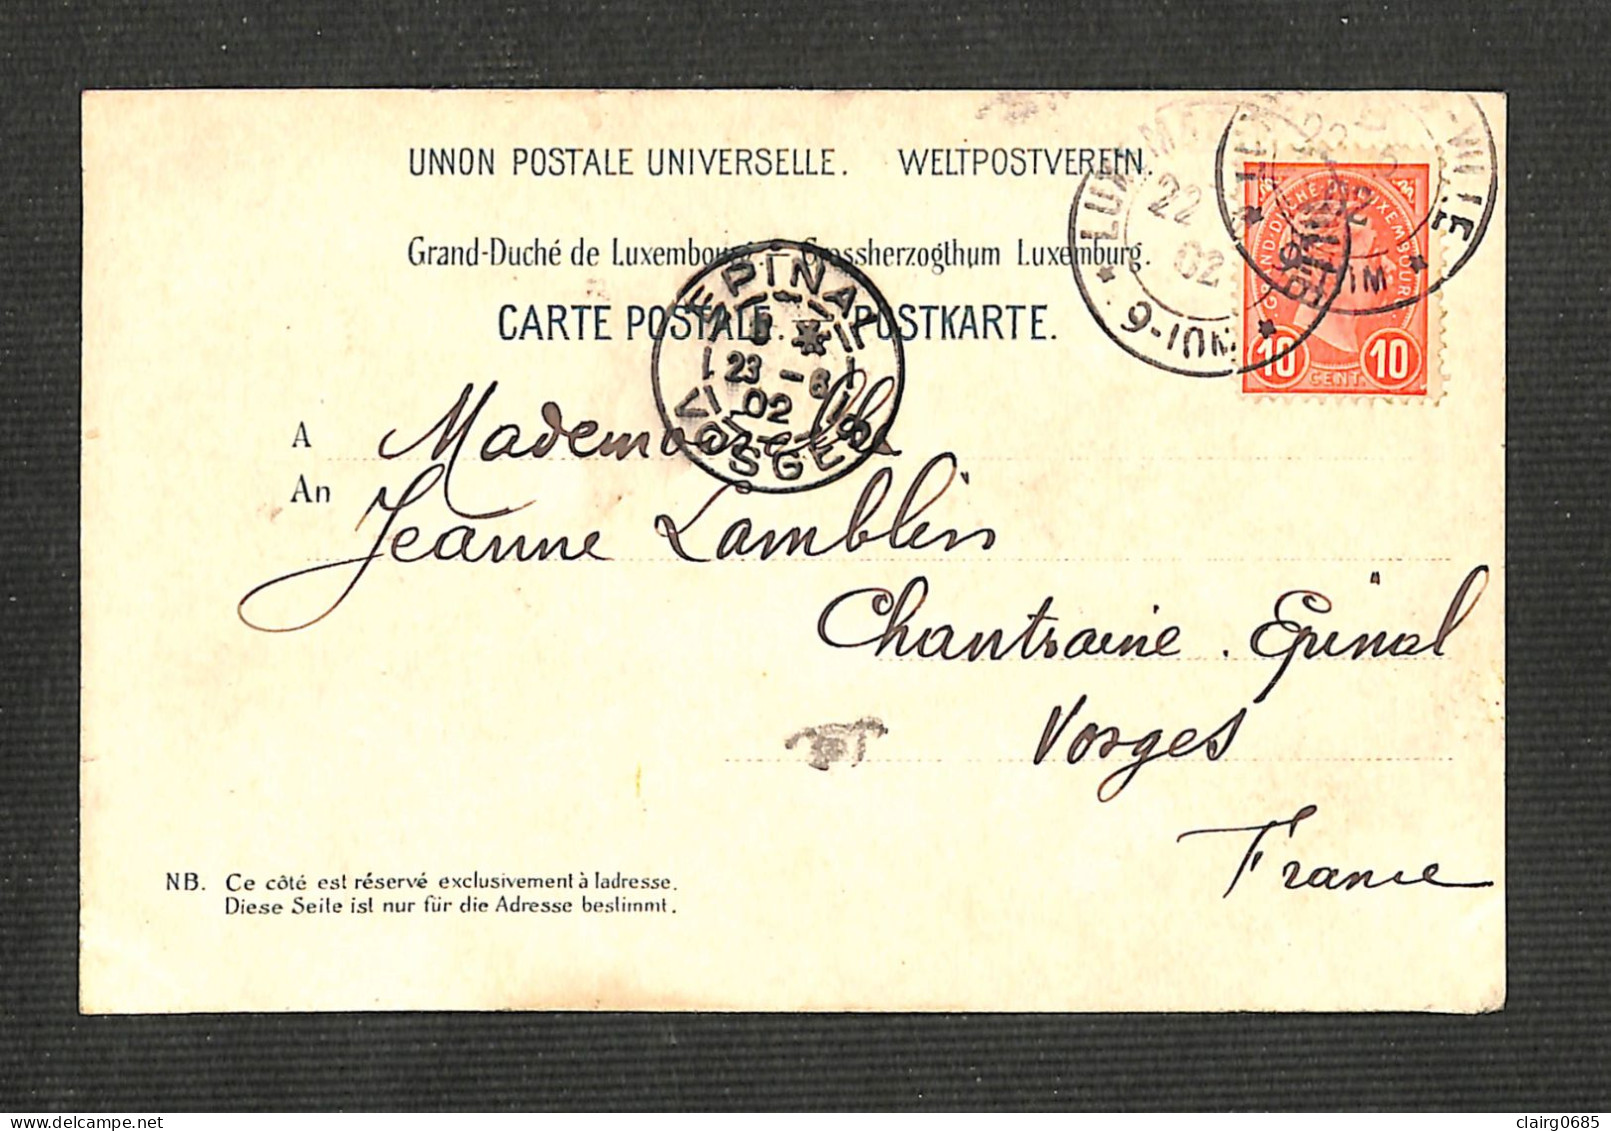 LUXEMBOURG - LUXEMBURG - Eingang Zur Stadt - 1902 - Luxembourg - Ville